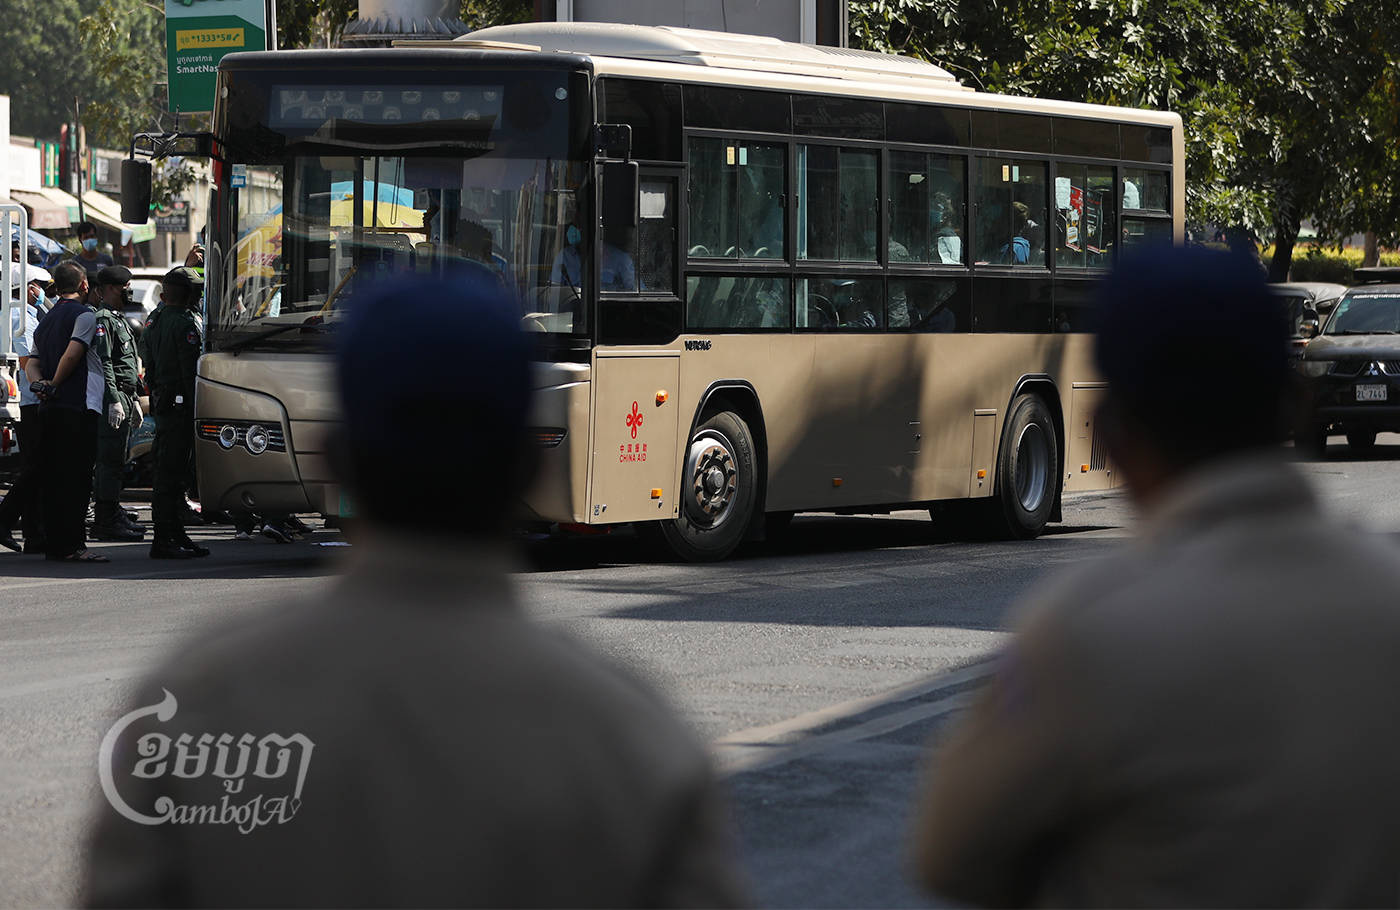 After officials forced striking NagaWorld employees into a bus, they took the workers to a quarantine center on the outskirts of the city, February 21, 2022. CamboJA/ Pring Samrang